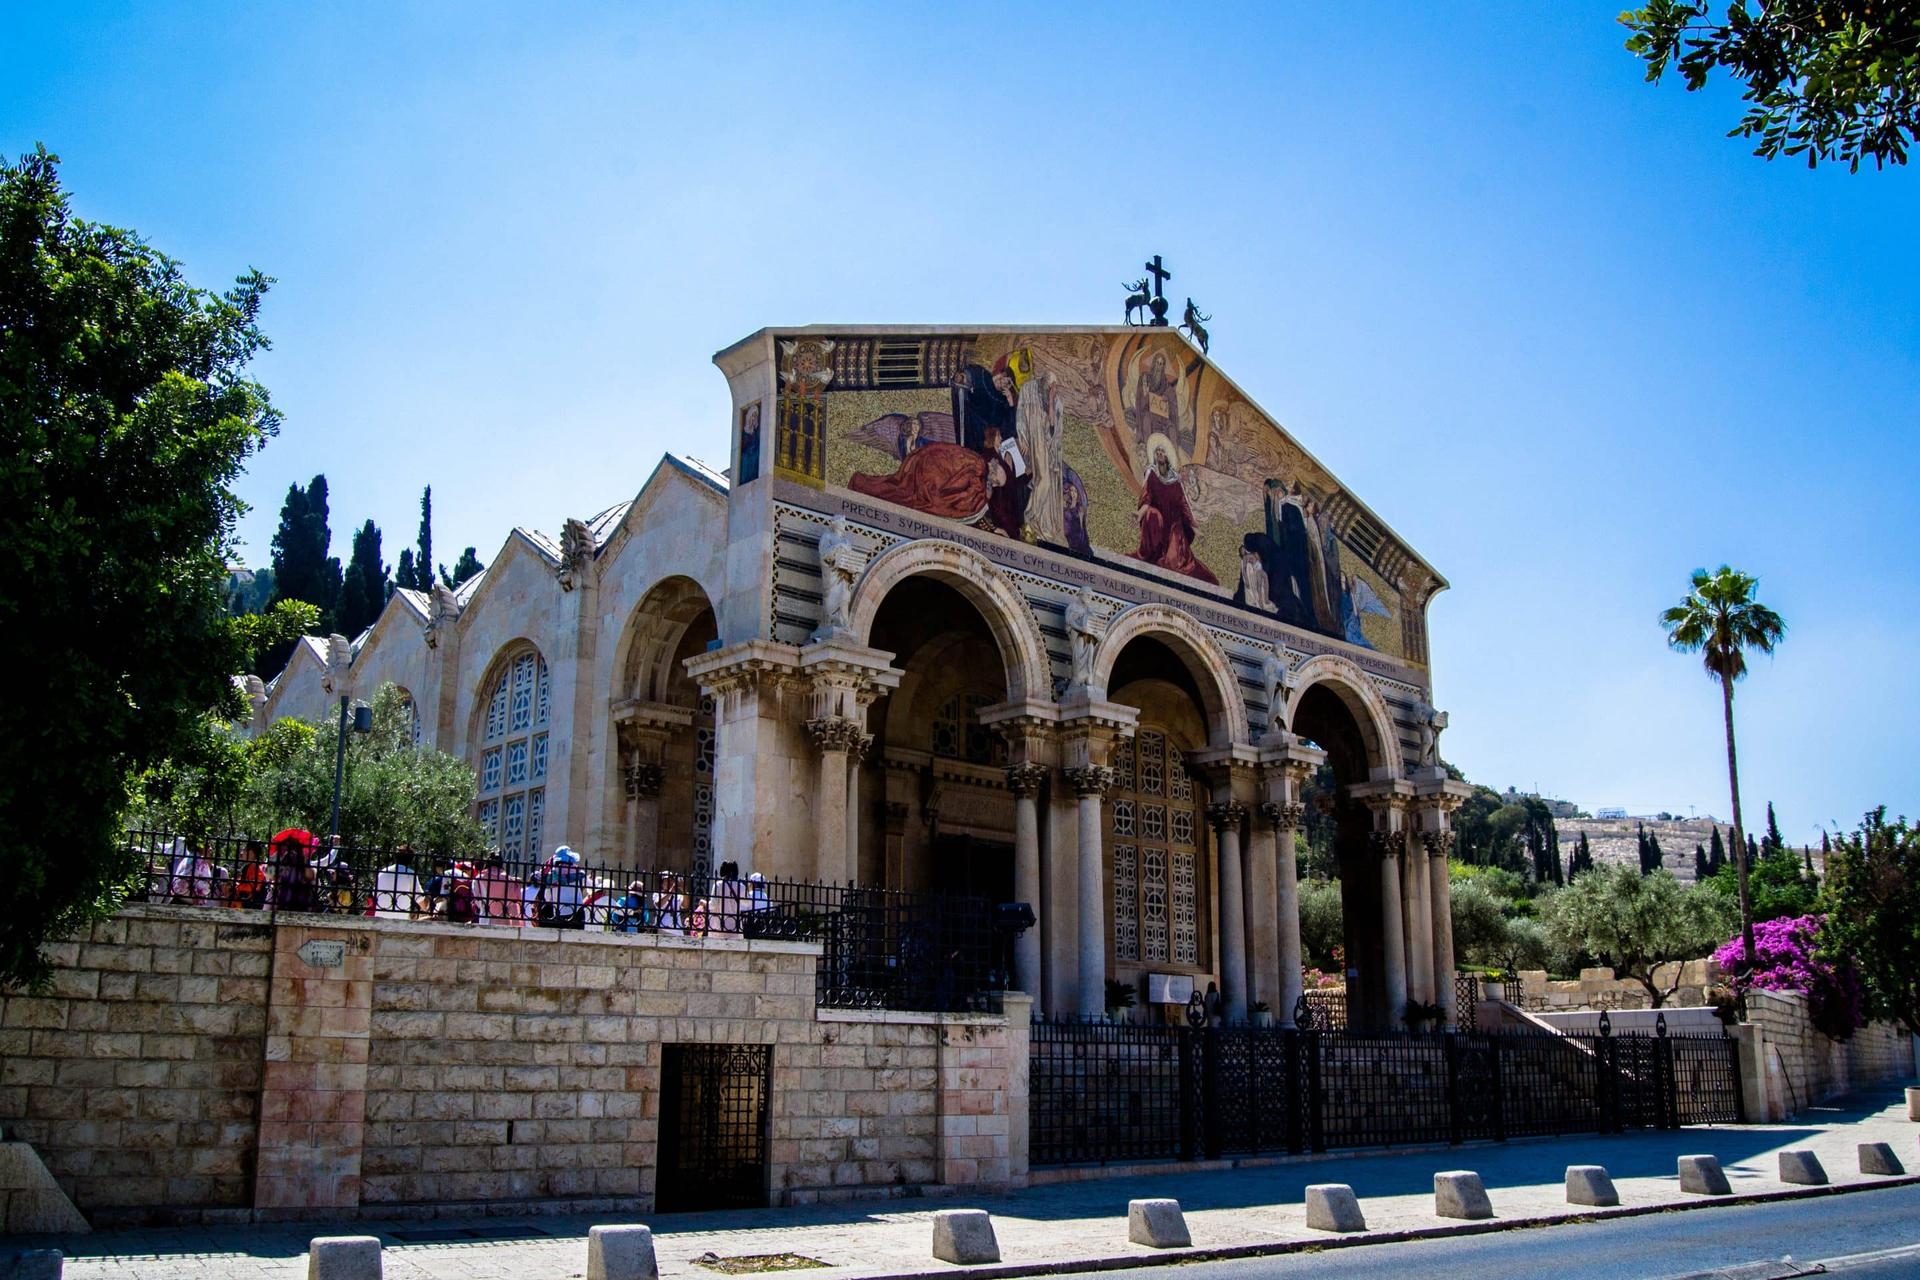 Gethsemane – Mount of Olives: the garden, the basilica and the grotto The landmarks of the Passion